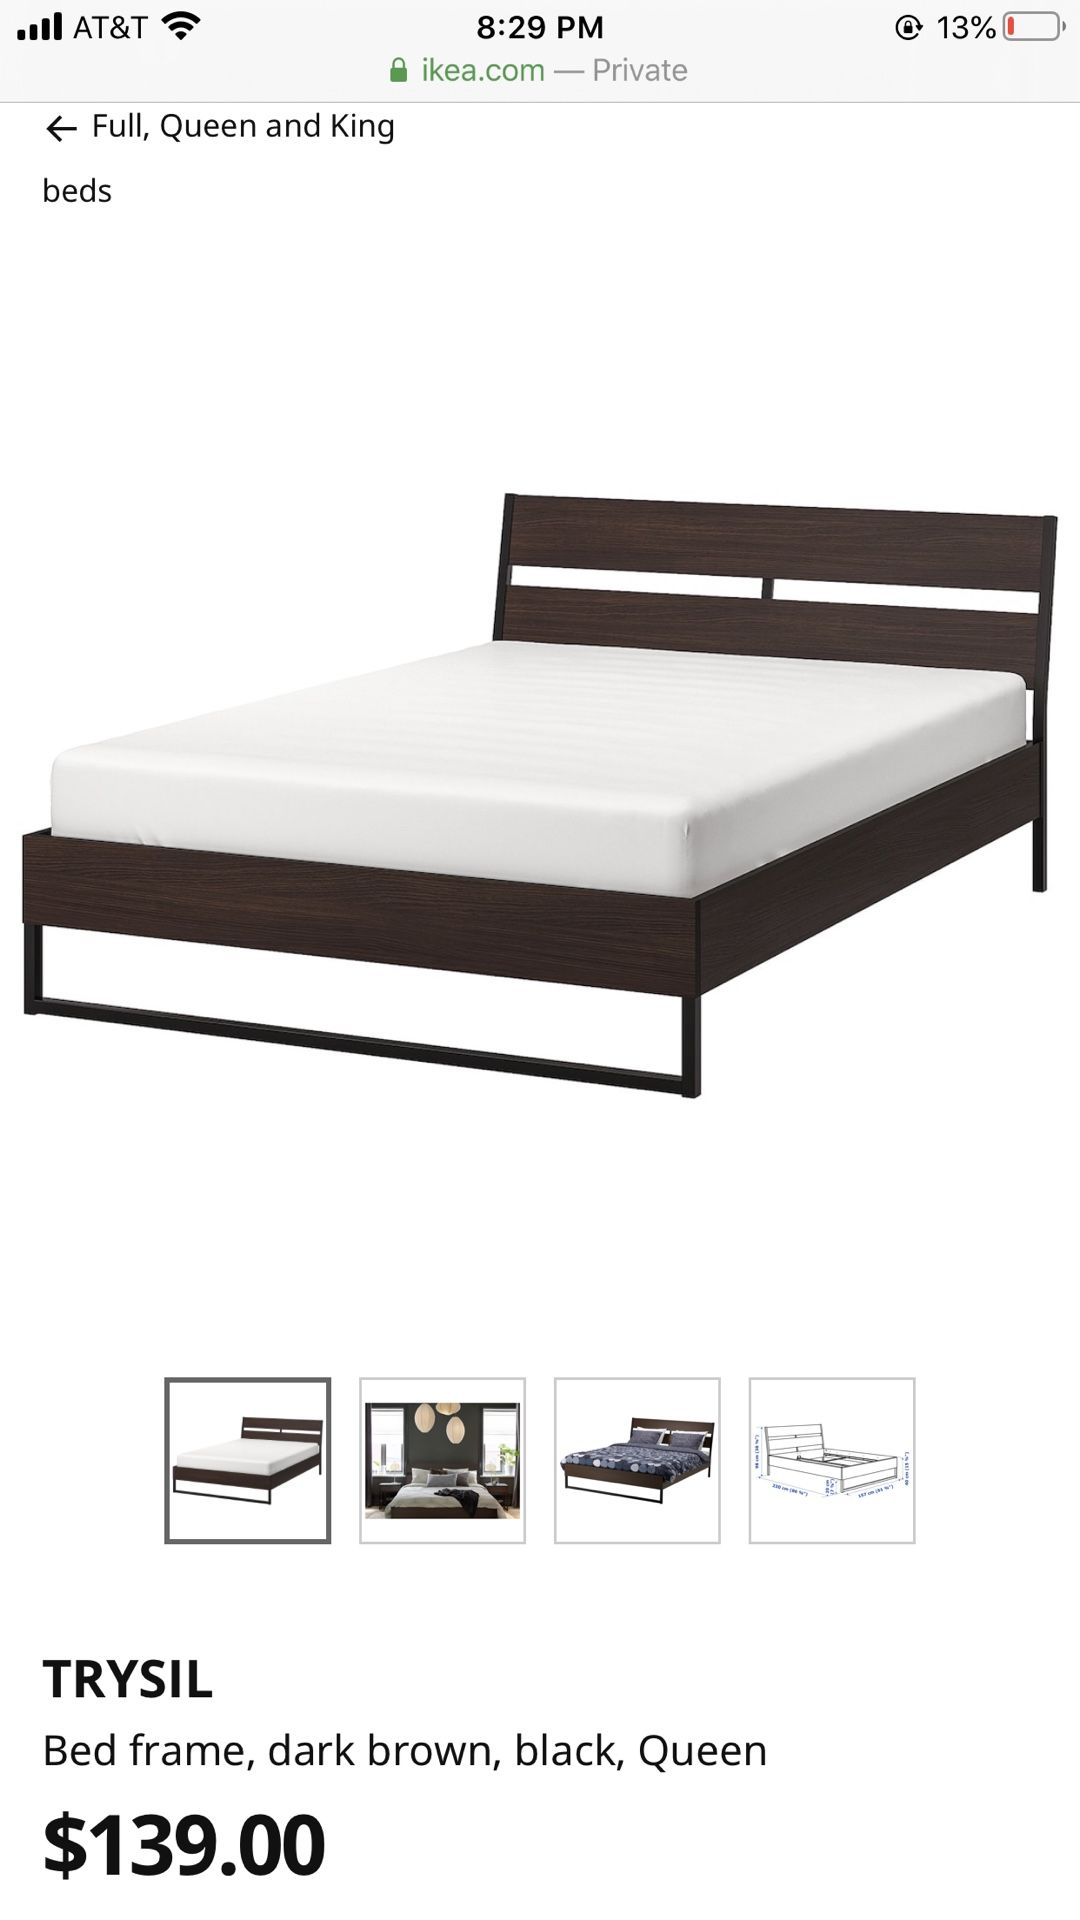 IKEA trysil queen bed frame